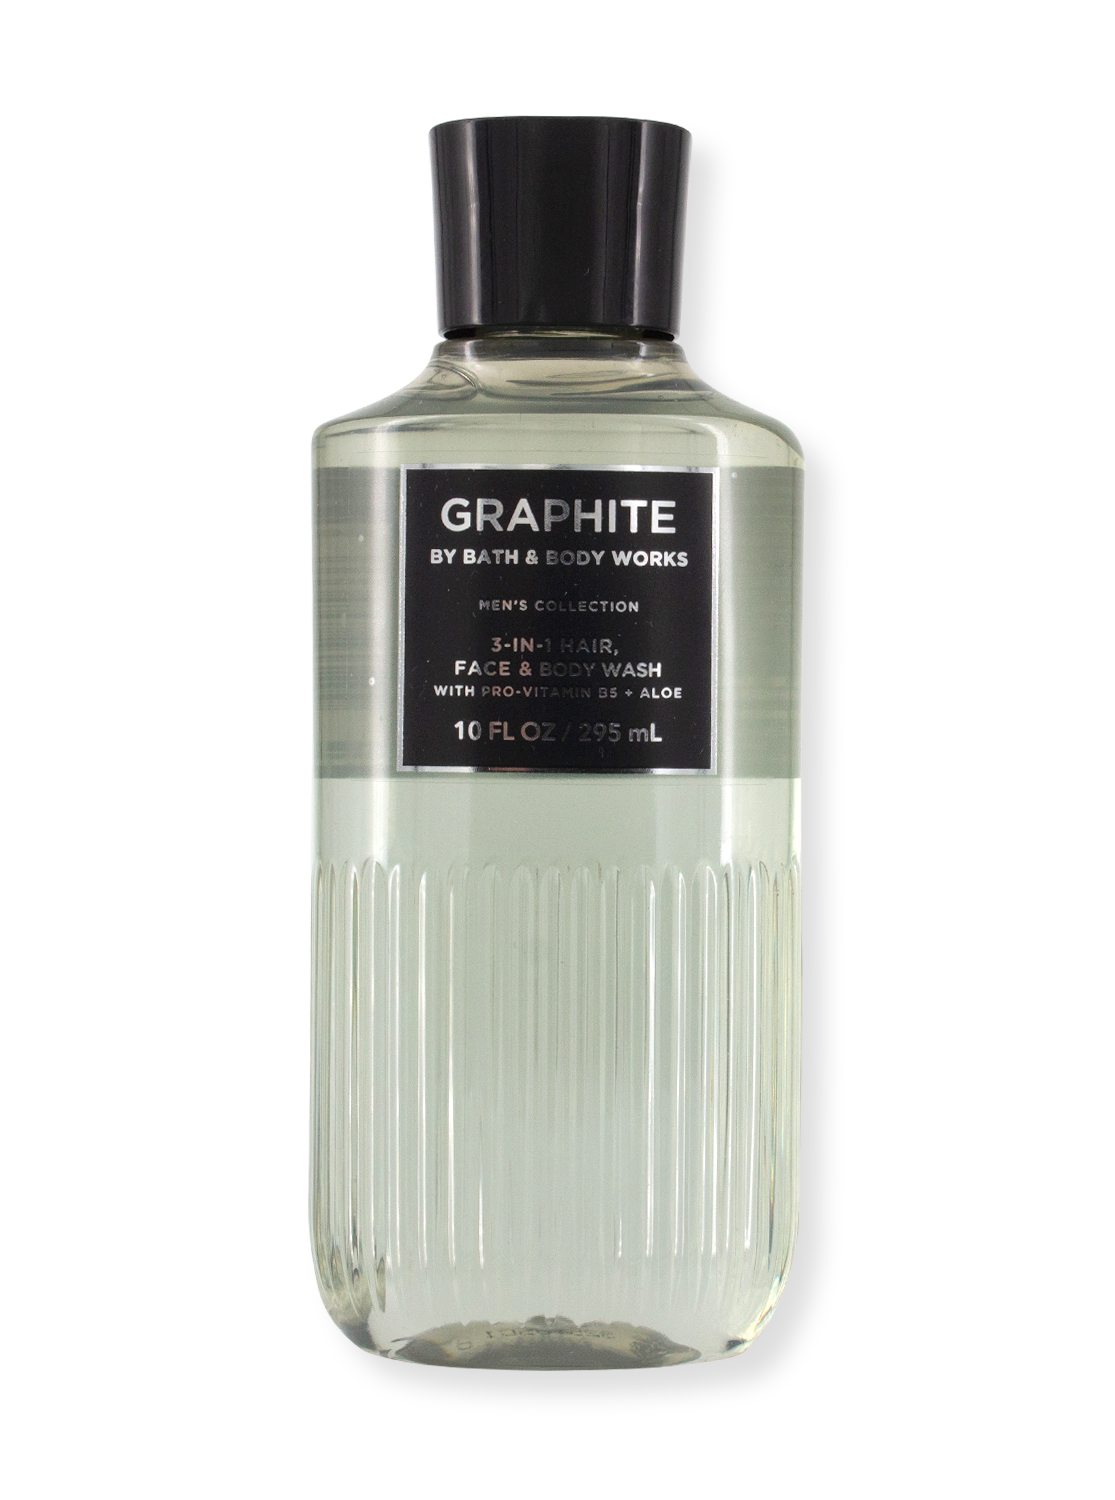 3in1 - Hair - Face & Body Wash - Graphite - 295ml